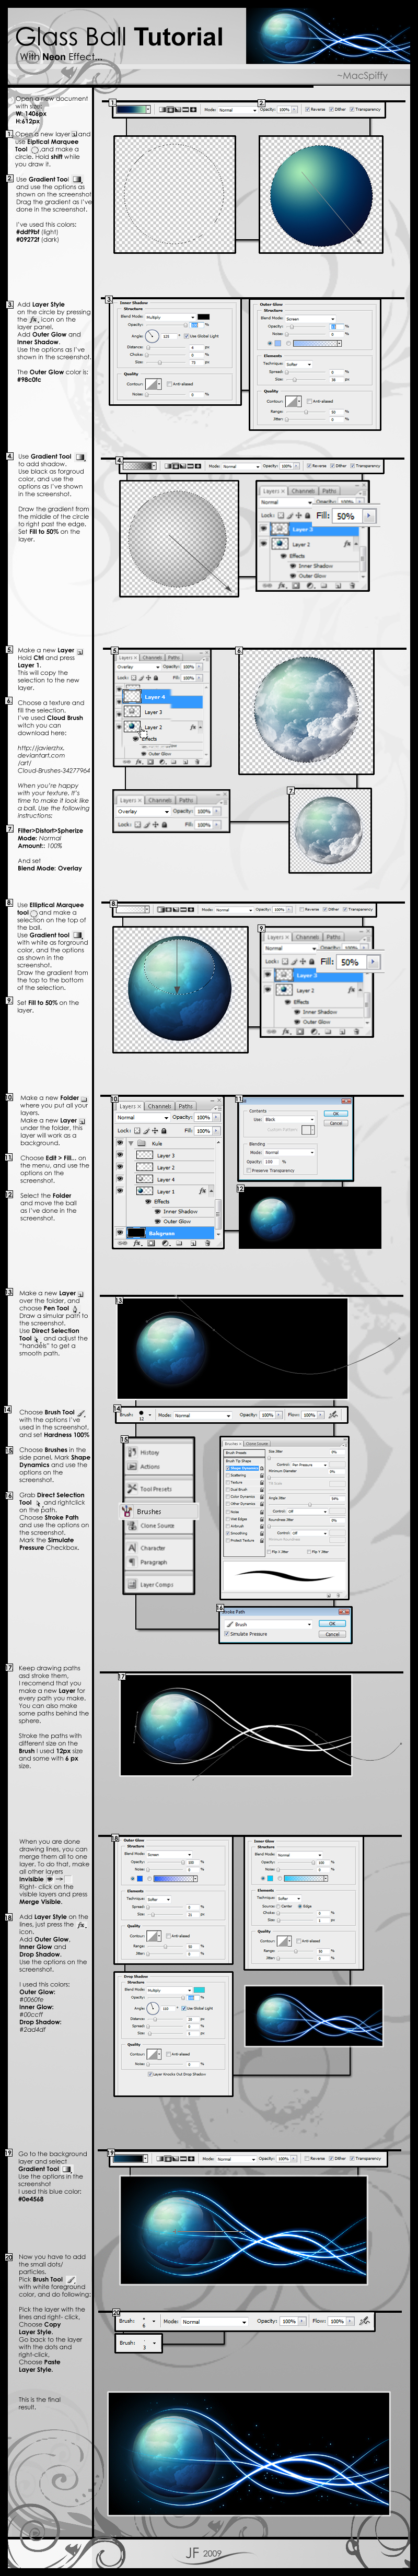 Create your own glass ball with this easy tutorial from photoshop.